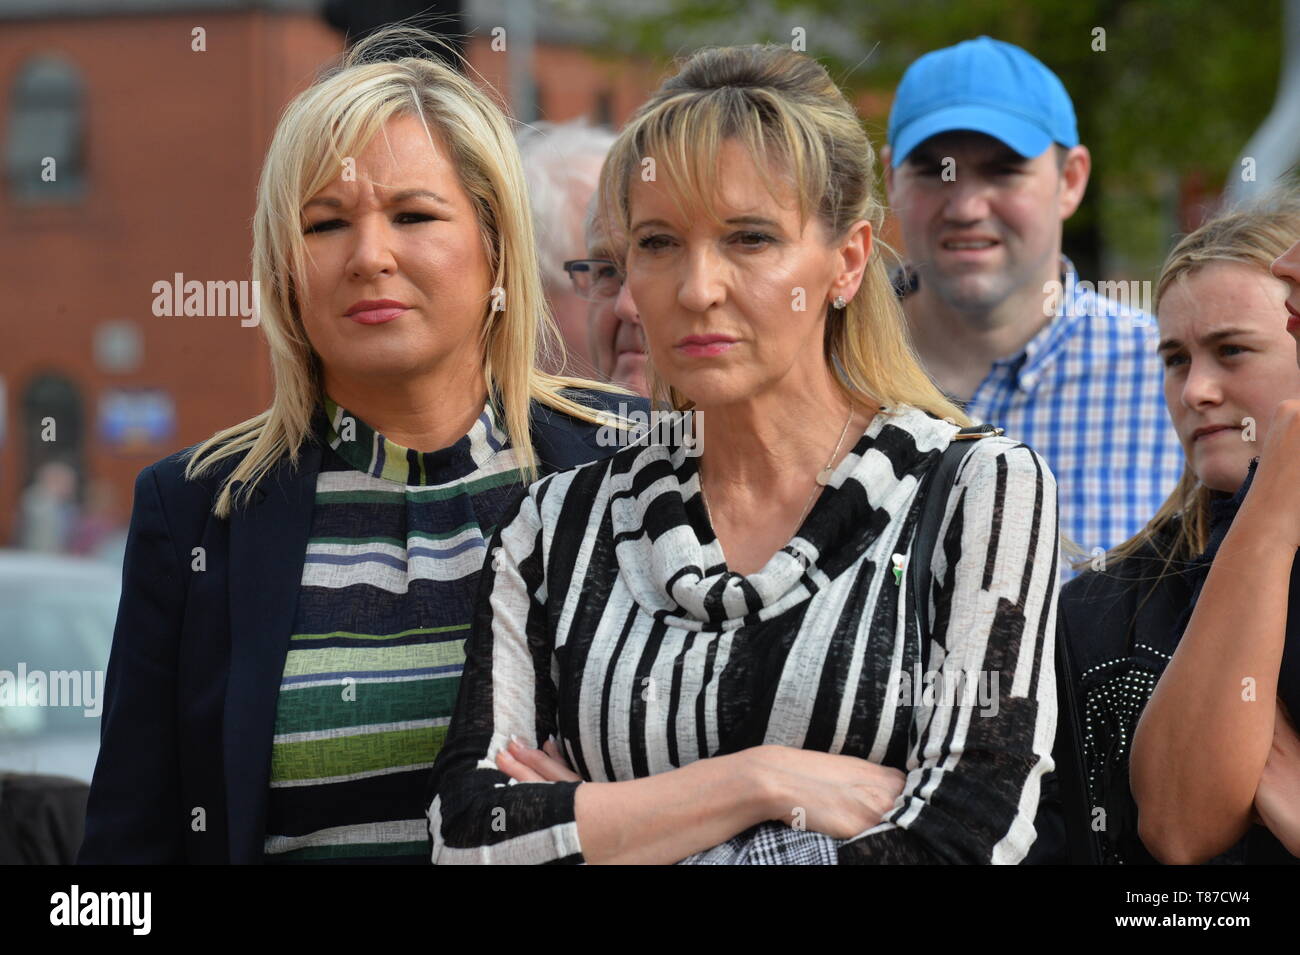 Sinn Fein leaders Mary Lou McDonald TD and Michelle O'Neill MLA attend a NUJ organised vigil, in Guildhall Square, Derry, for murdered journalist Lyra McKee. ©George Sweeney / Alamy Stock Photo